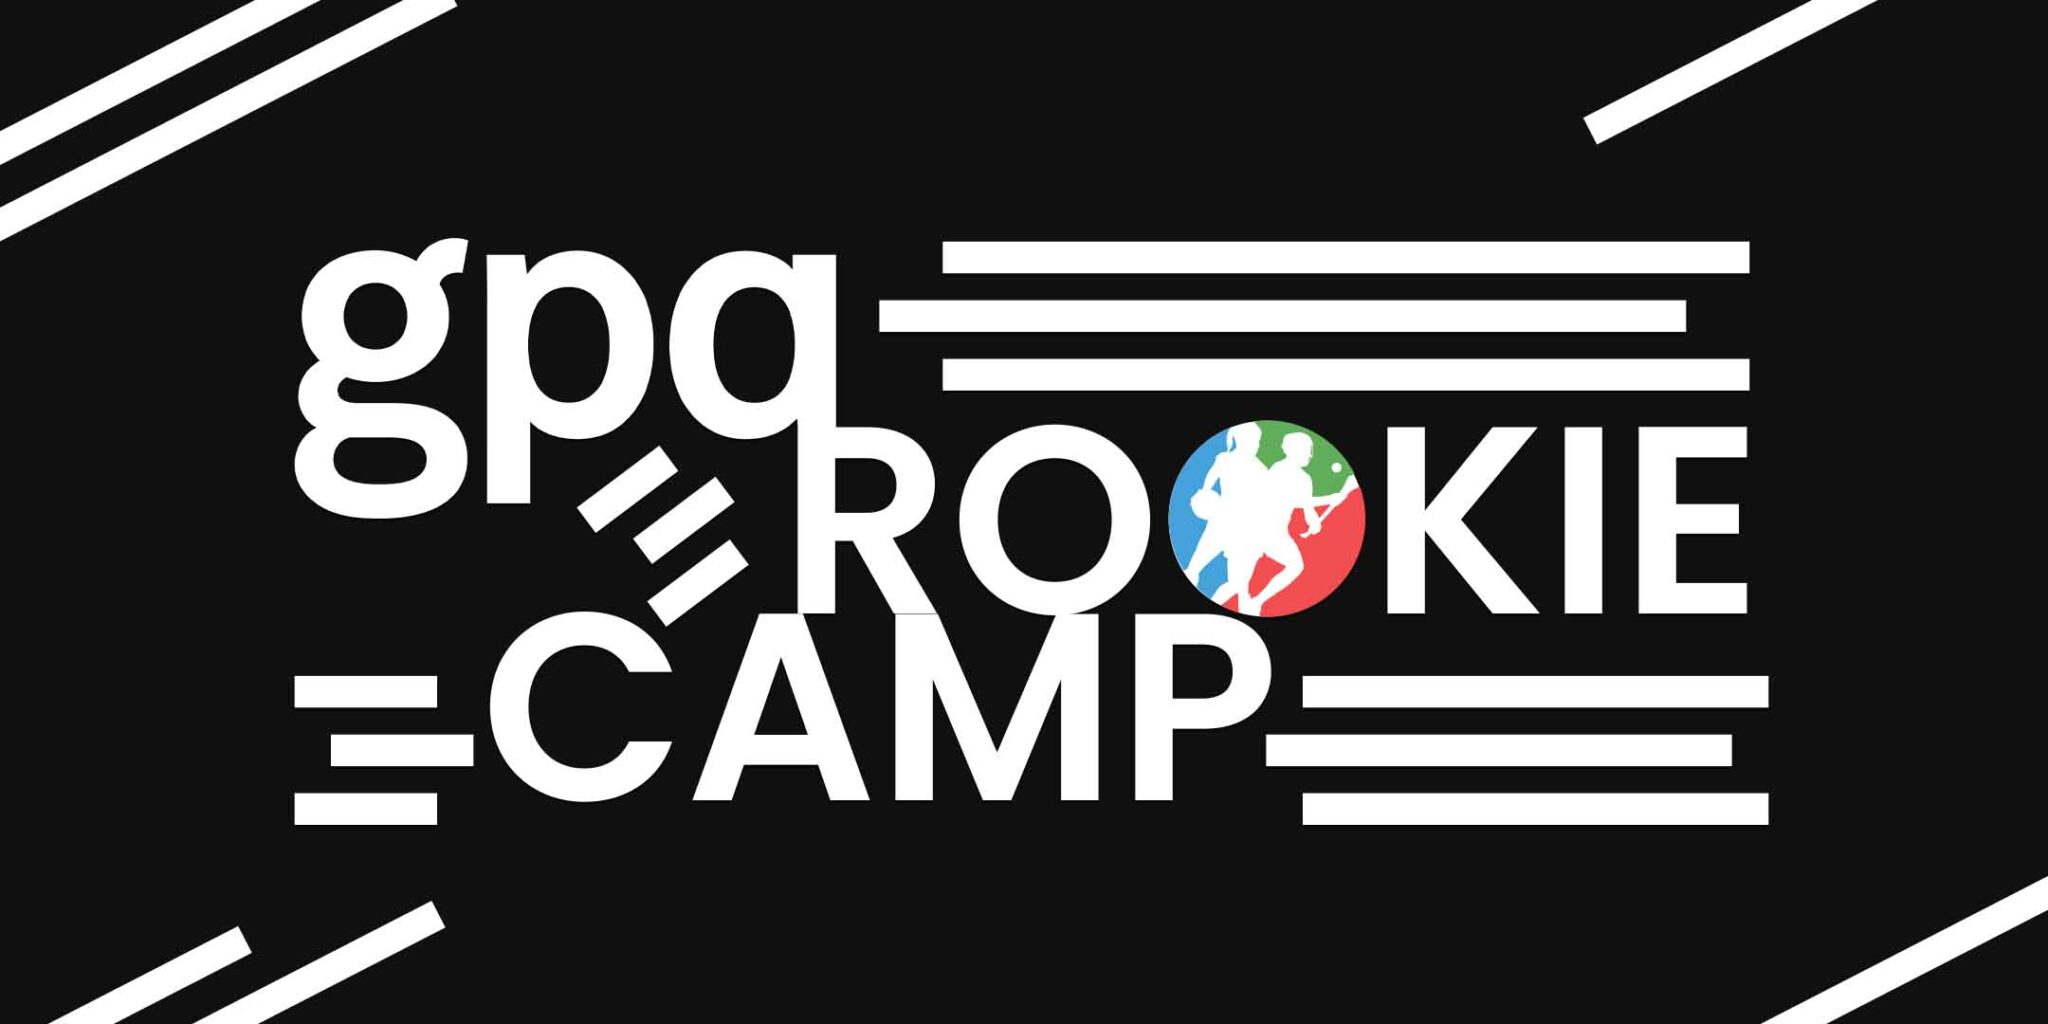 Rookie Camp dates announced! Gaelic Players Association